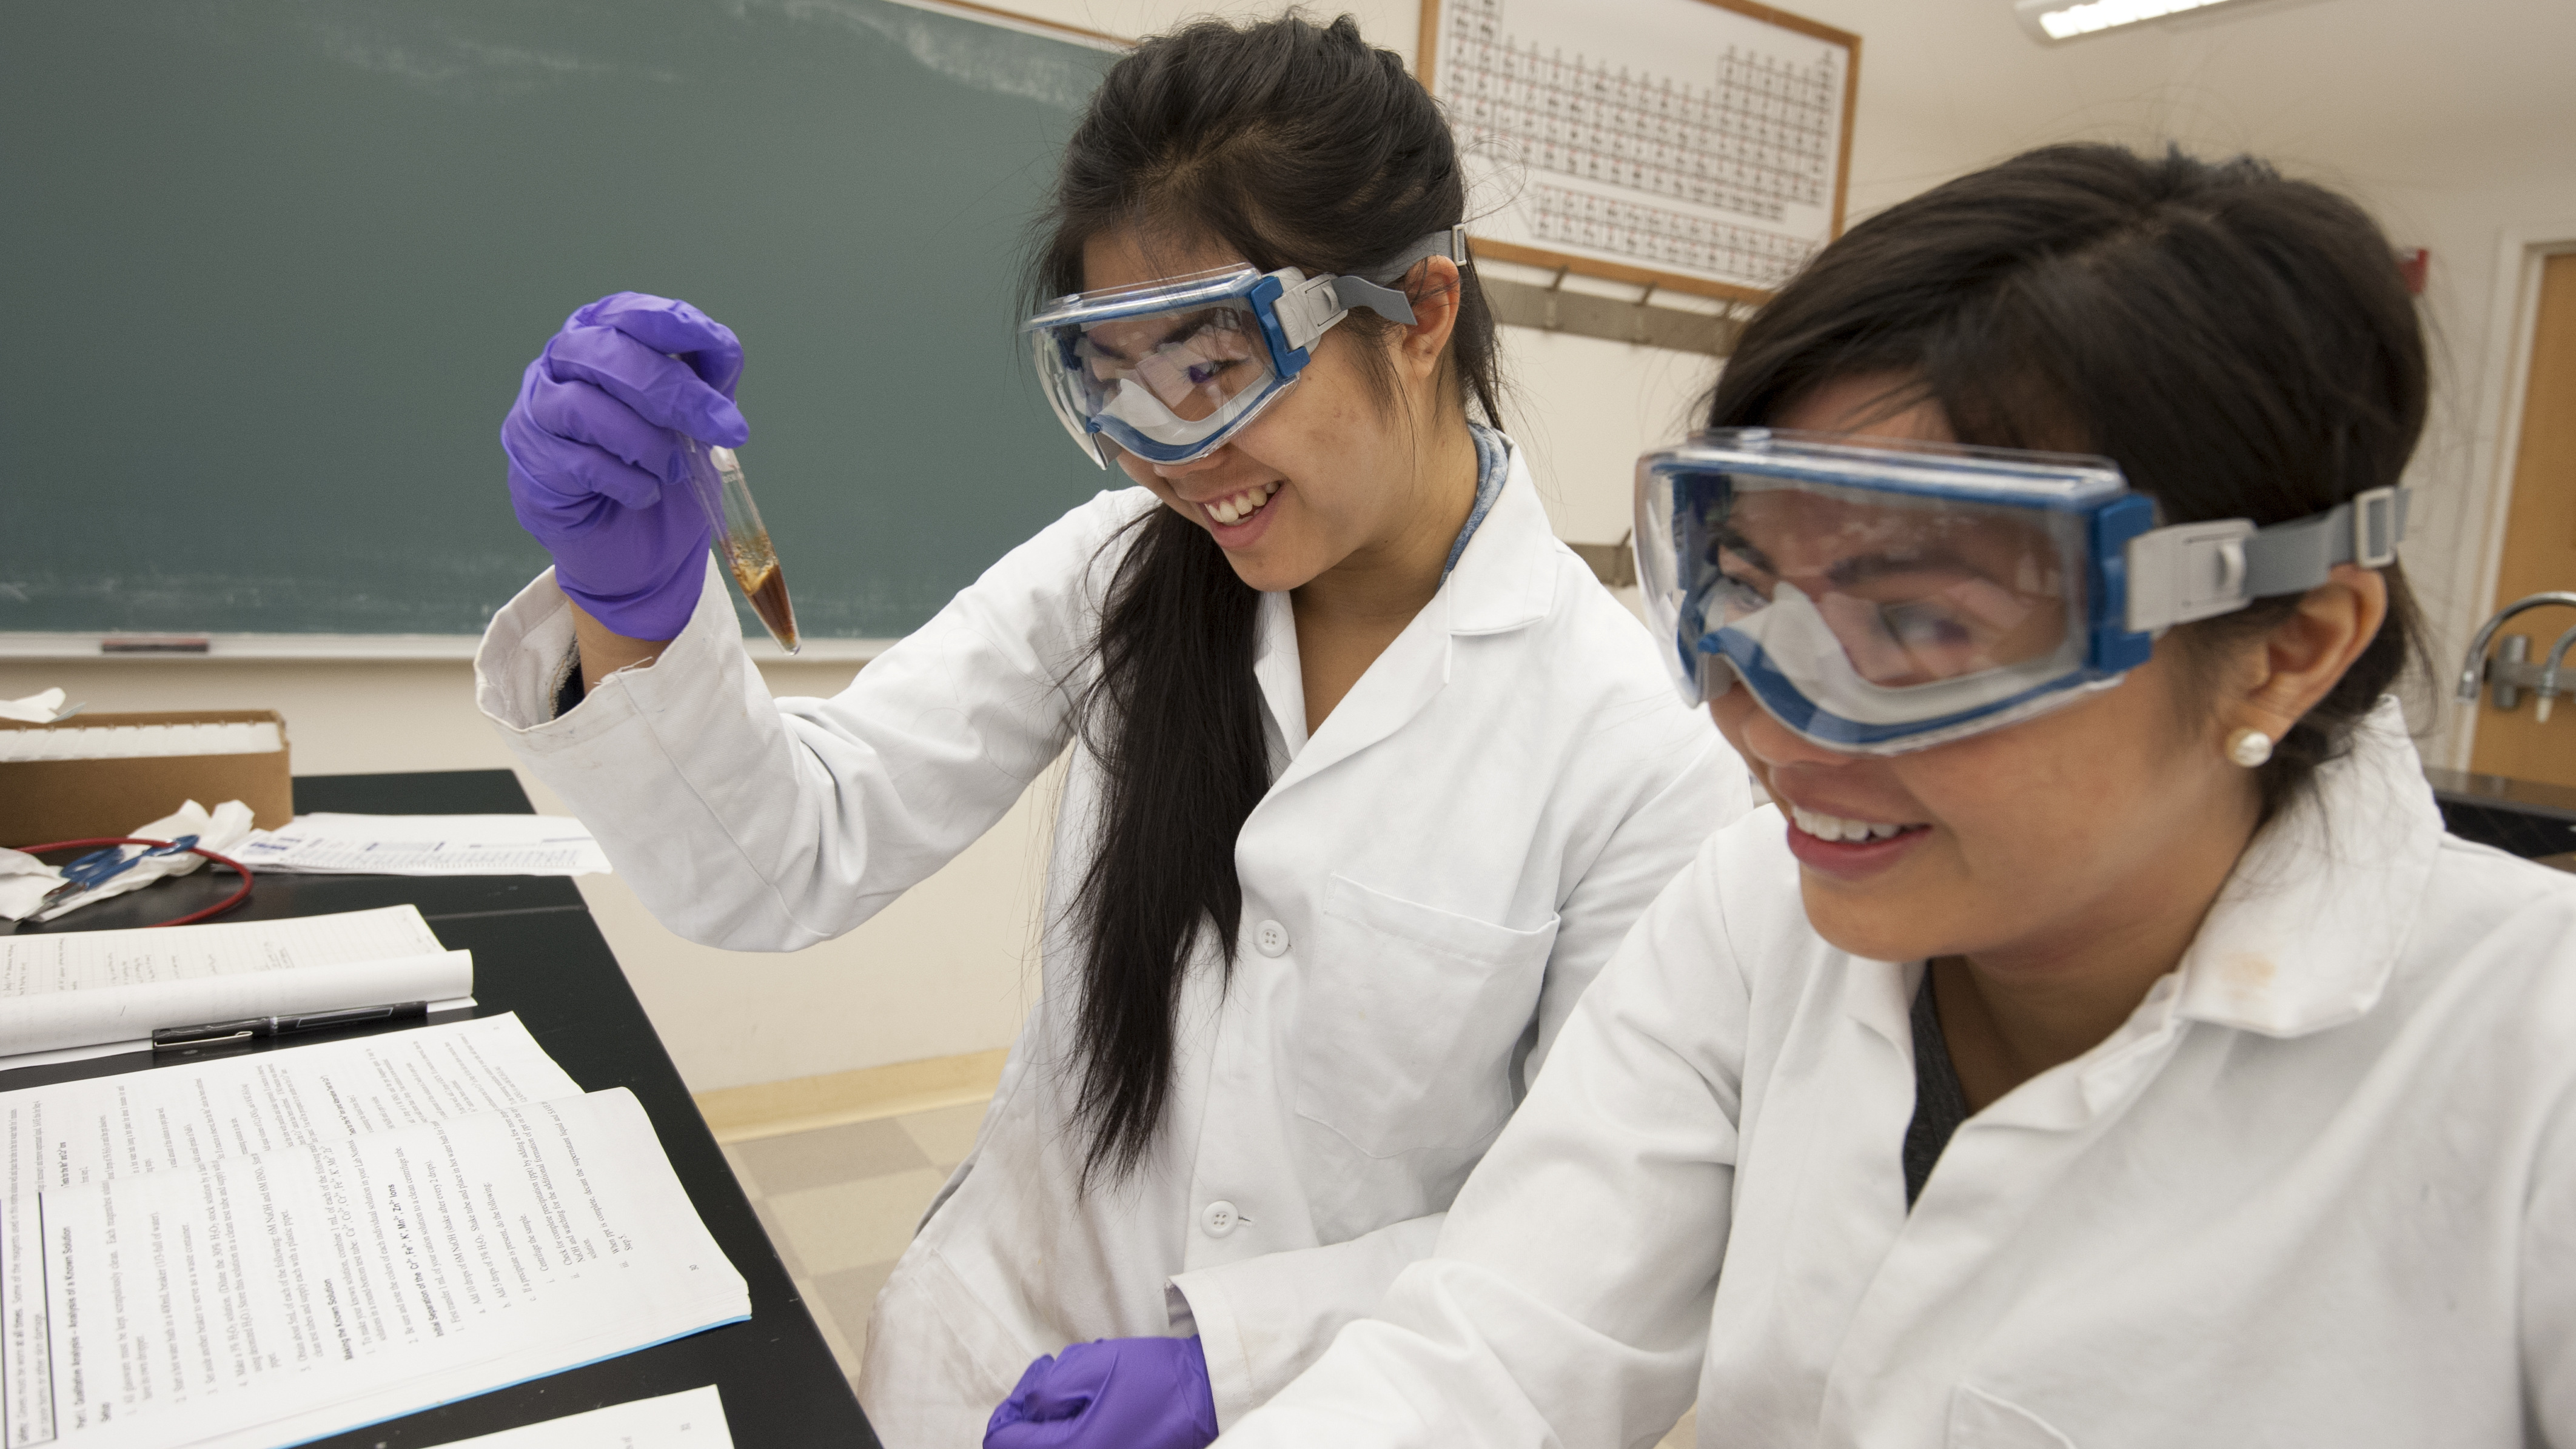 Jessica Bee and Angie Tran, biological science majors at UC Davis, conduct their experiment during a Chemistry 2C lab at UC Davis on Tuesday, April 29, 2014.  The students were preforming qualitative analysis on a solution, trying to identify the five cations present.